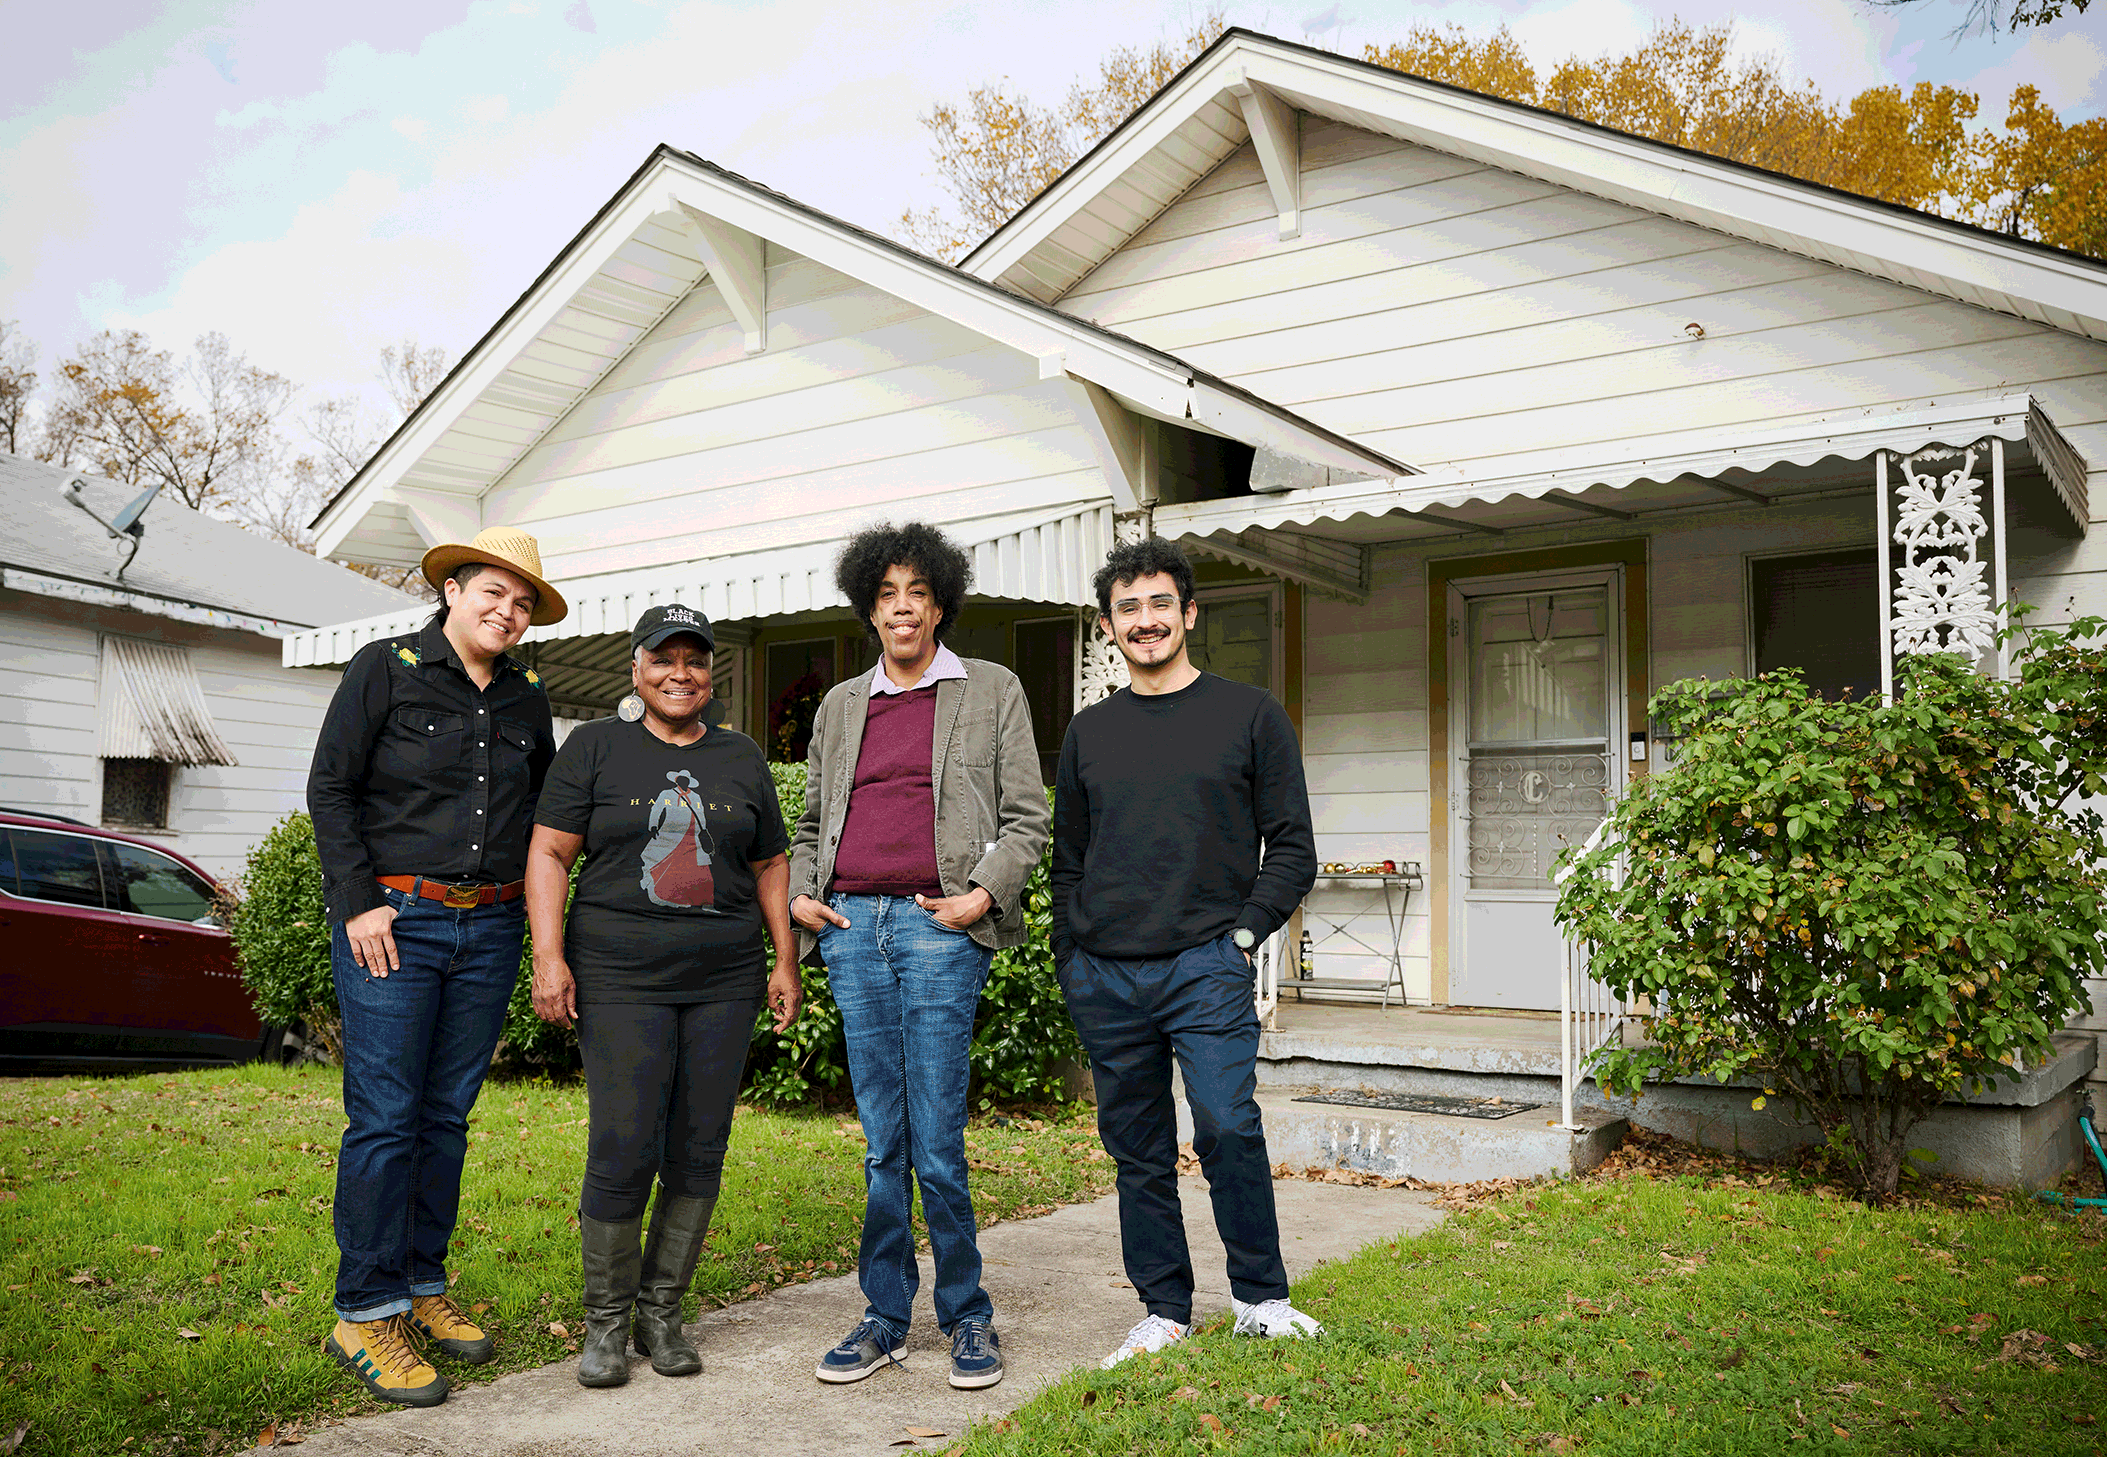 The Urban Historical Reclamation and Recognition Collective (from left to right: Ángel Faz, Vicki Meek, Jonathan Norton and Christian Vazquez) is bringing the Tenth Street neighbourhood’s story to life in Dallas

Photo: Jonathan Zizzo. Courtesy Nasher Sculpture Center